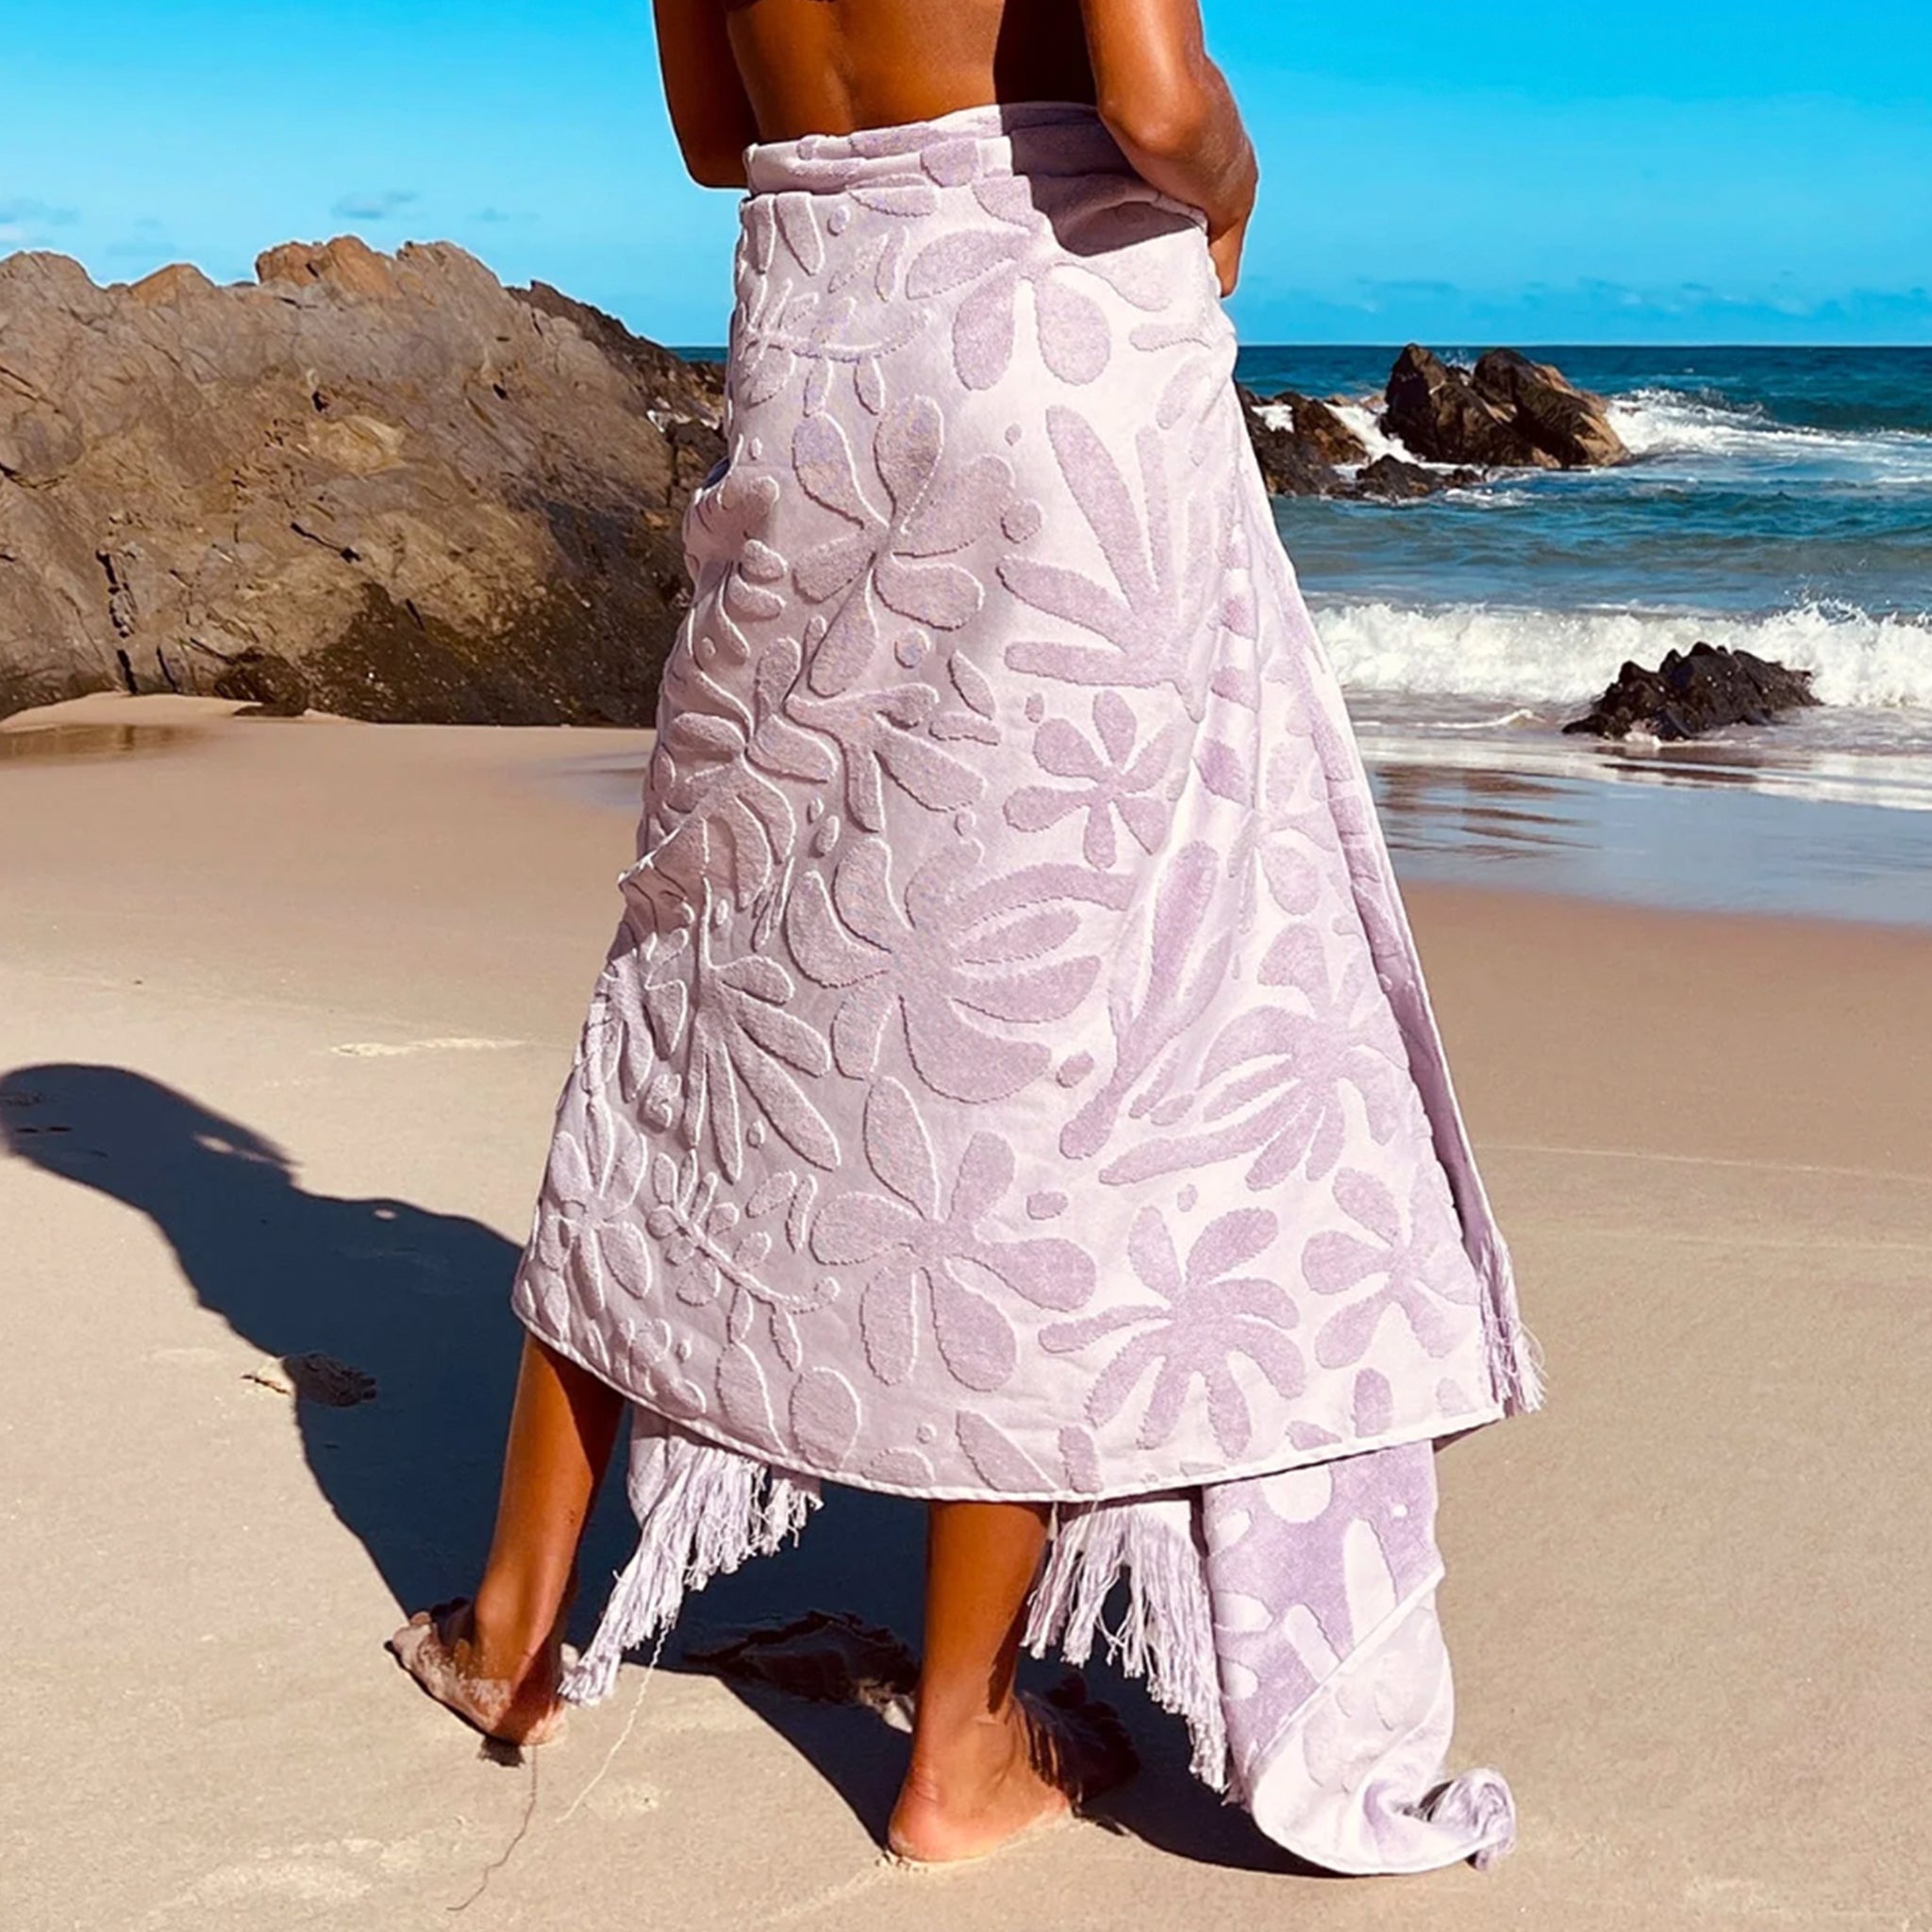 A light purple towel with a subtle floral print and fringe edge